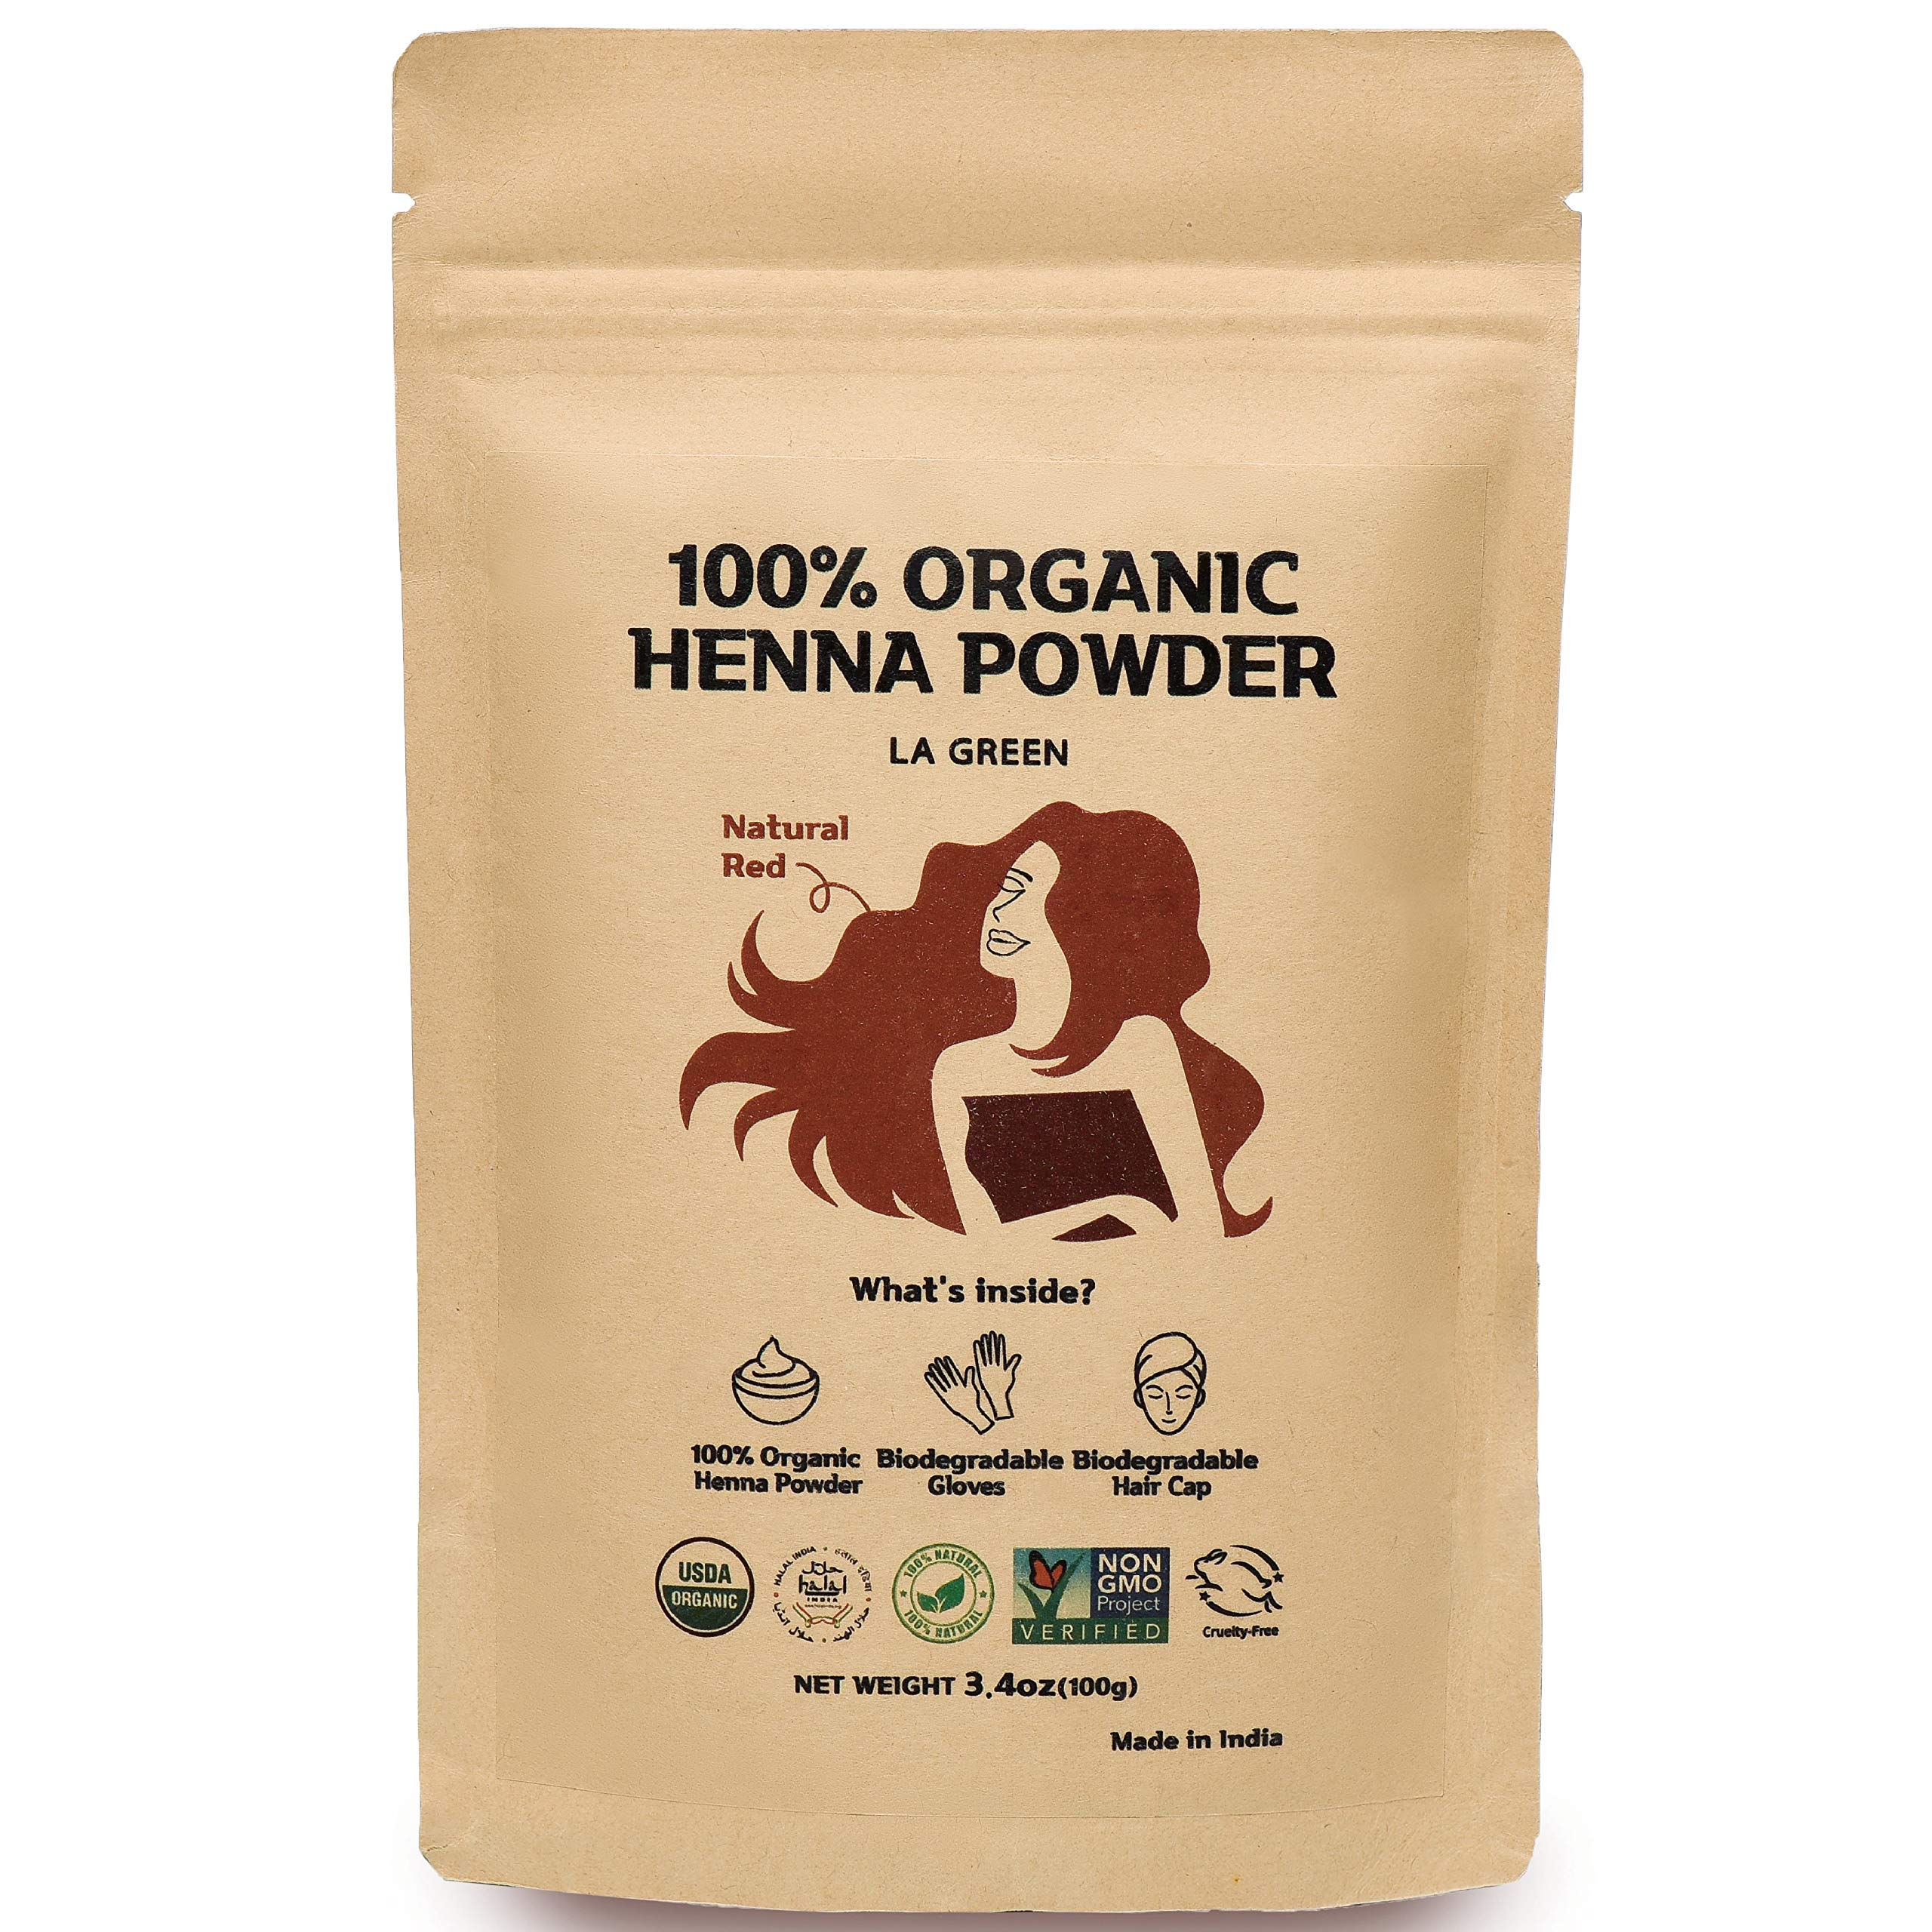 Mua 100% Organic USDA Henna Powder For Hair Dye - Natural Hair Color, Best  For Hair, Soft Shiny & Healthy Hair, No Chemical or Additive, Including  application gloves & hair cap -